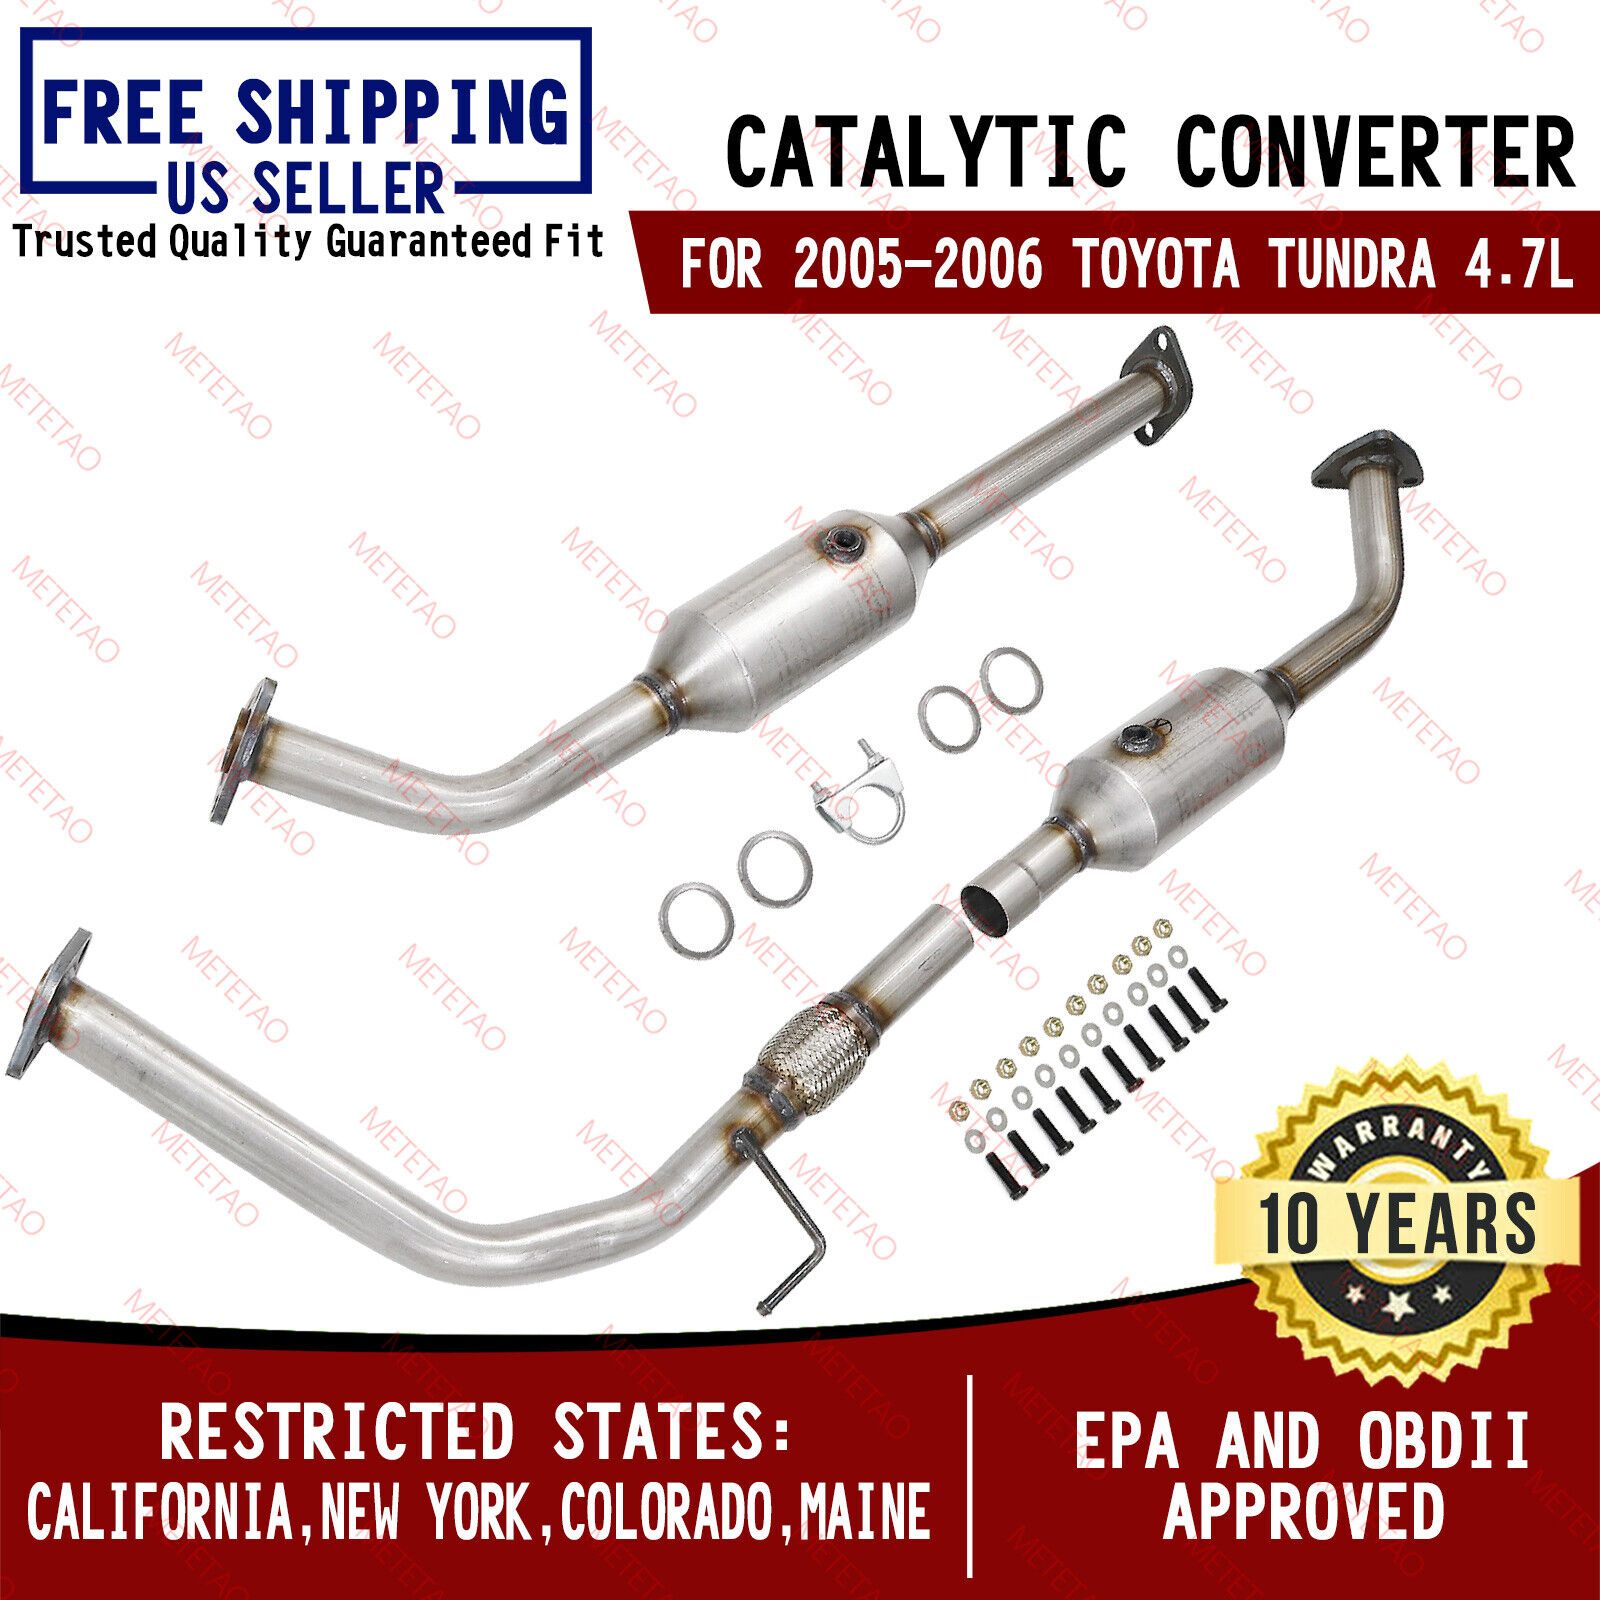 For 2005-2006 Toyota Tundra 4.7L Both Side Catalytic Converters OBDII